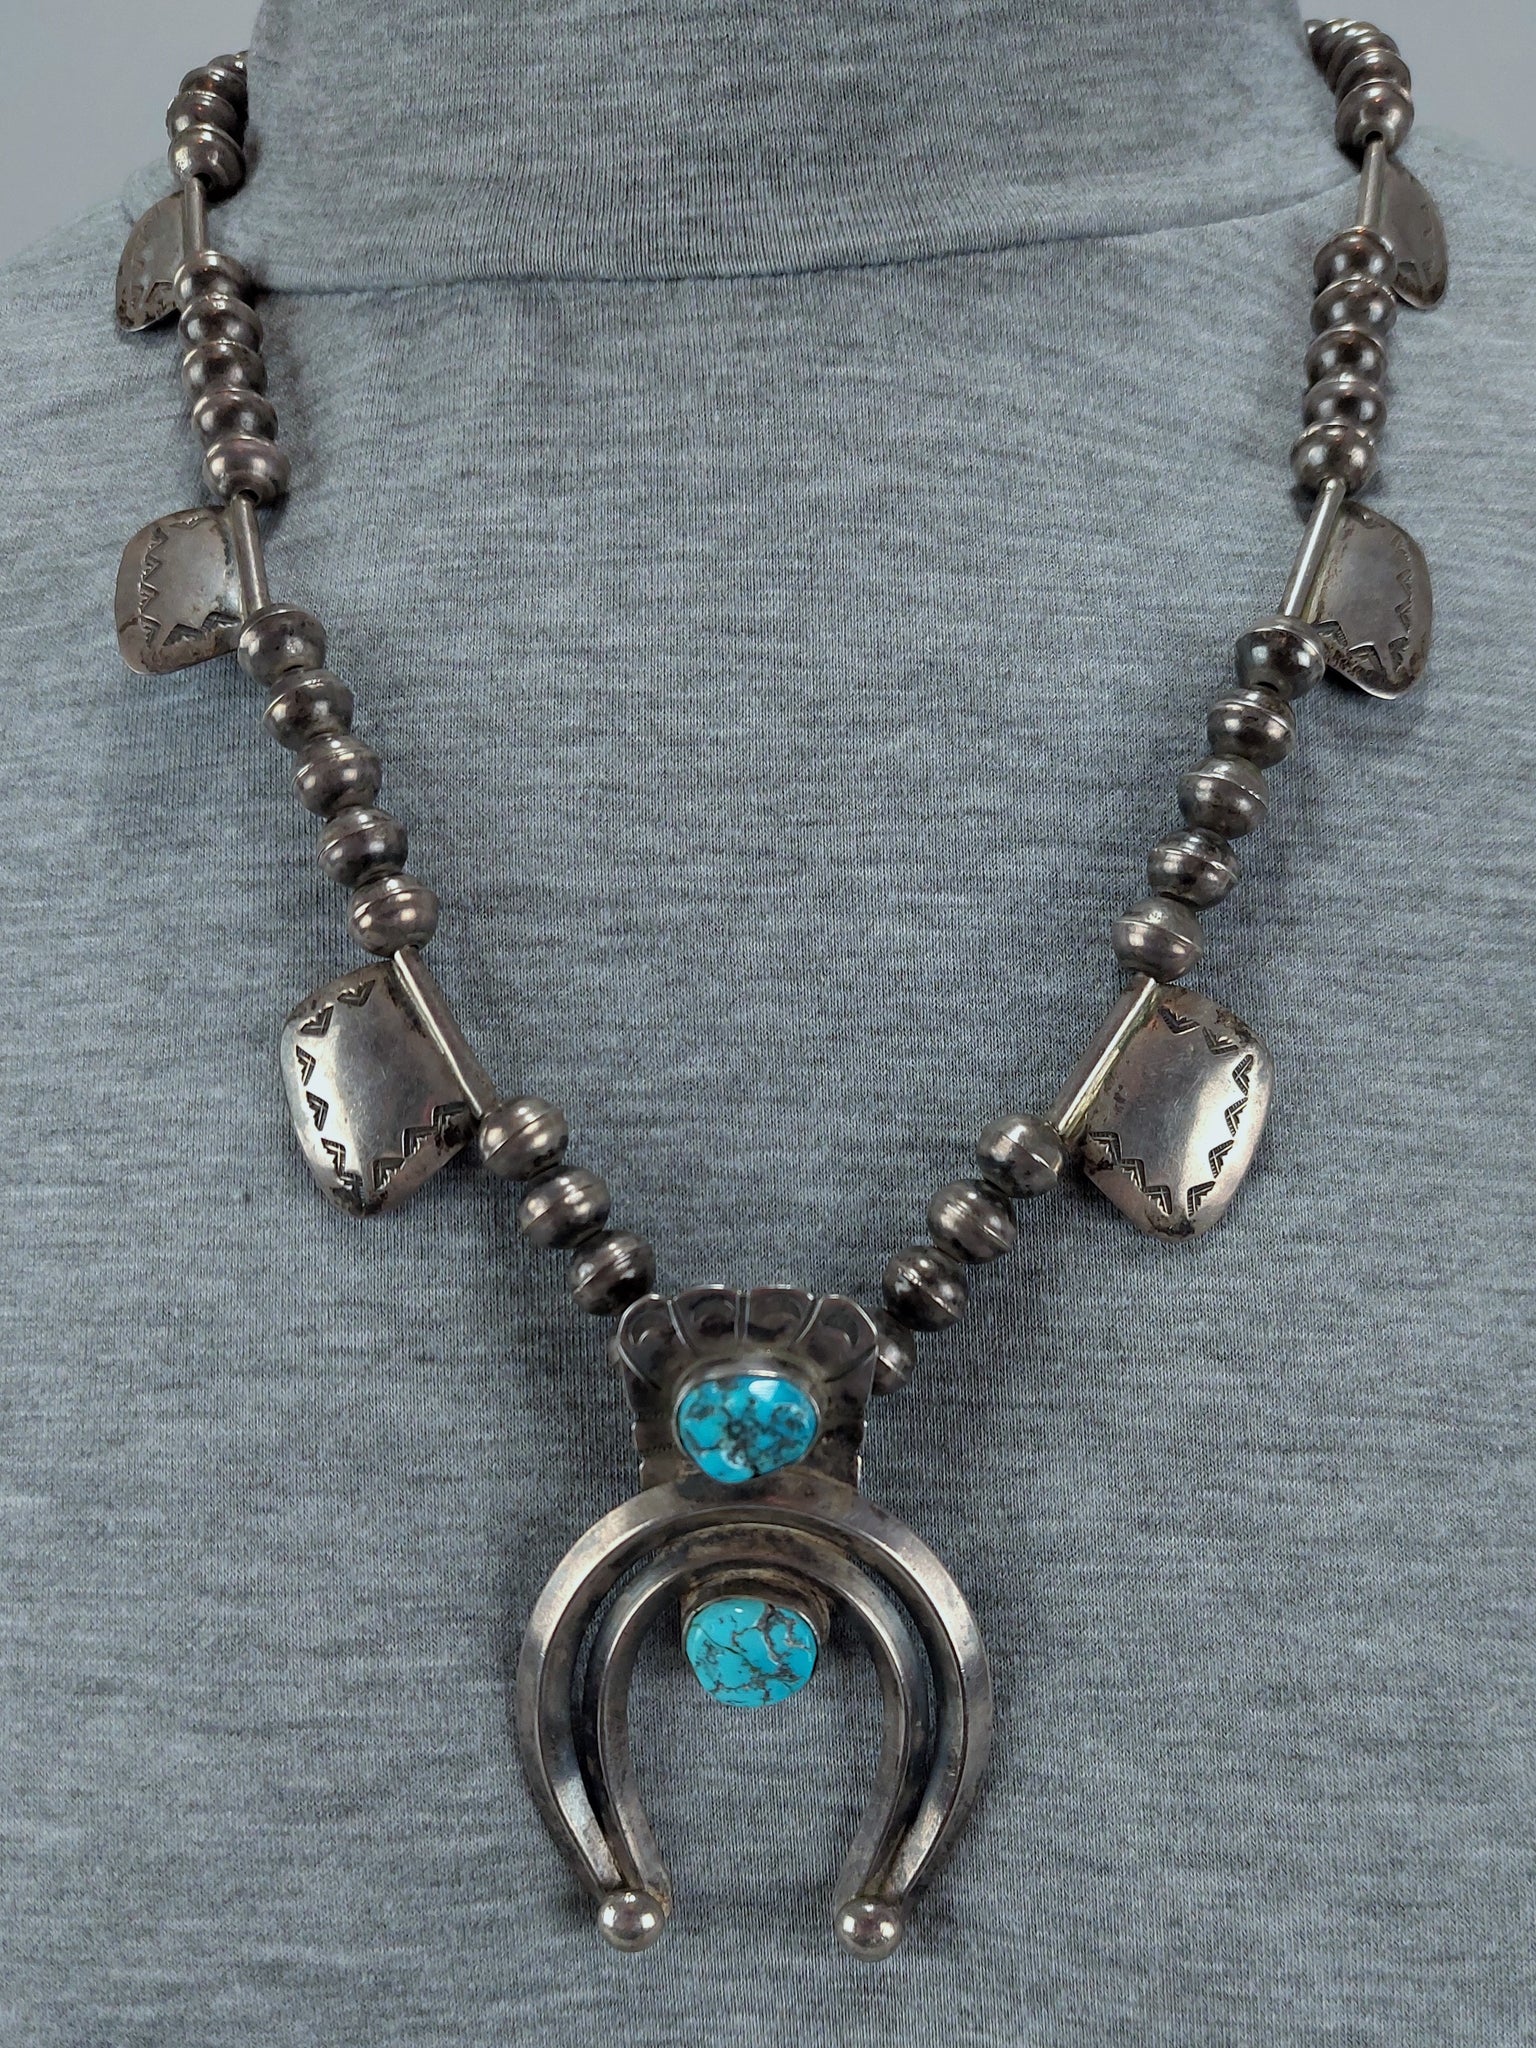 Unusual Old Pawn Turquoise & Silver Coin Squash Blossom Necklace NAVAJO